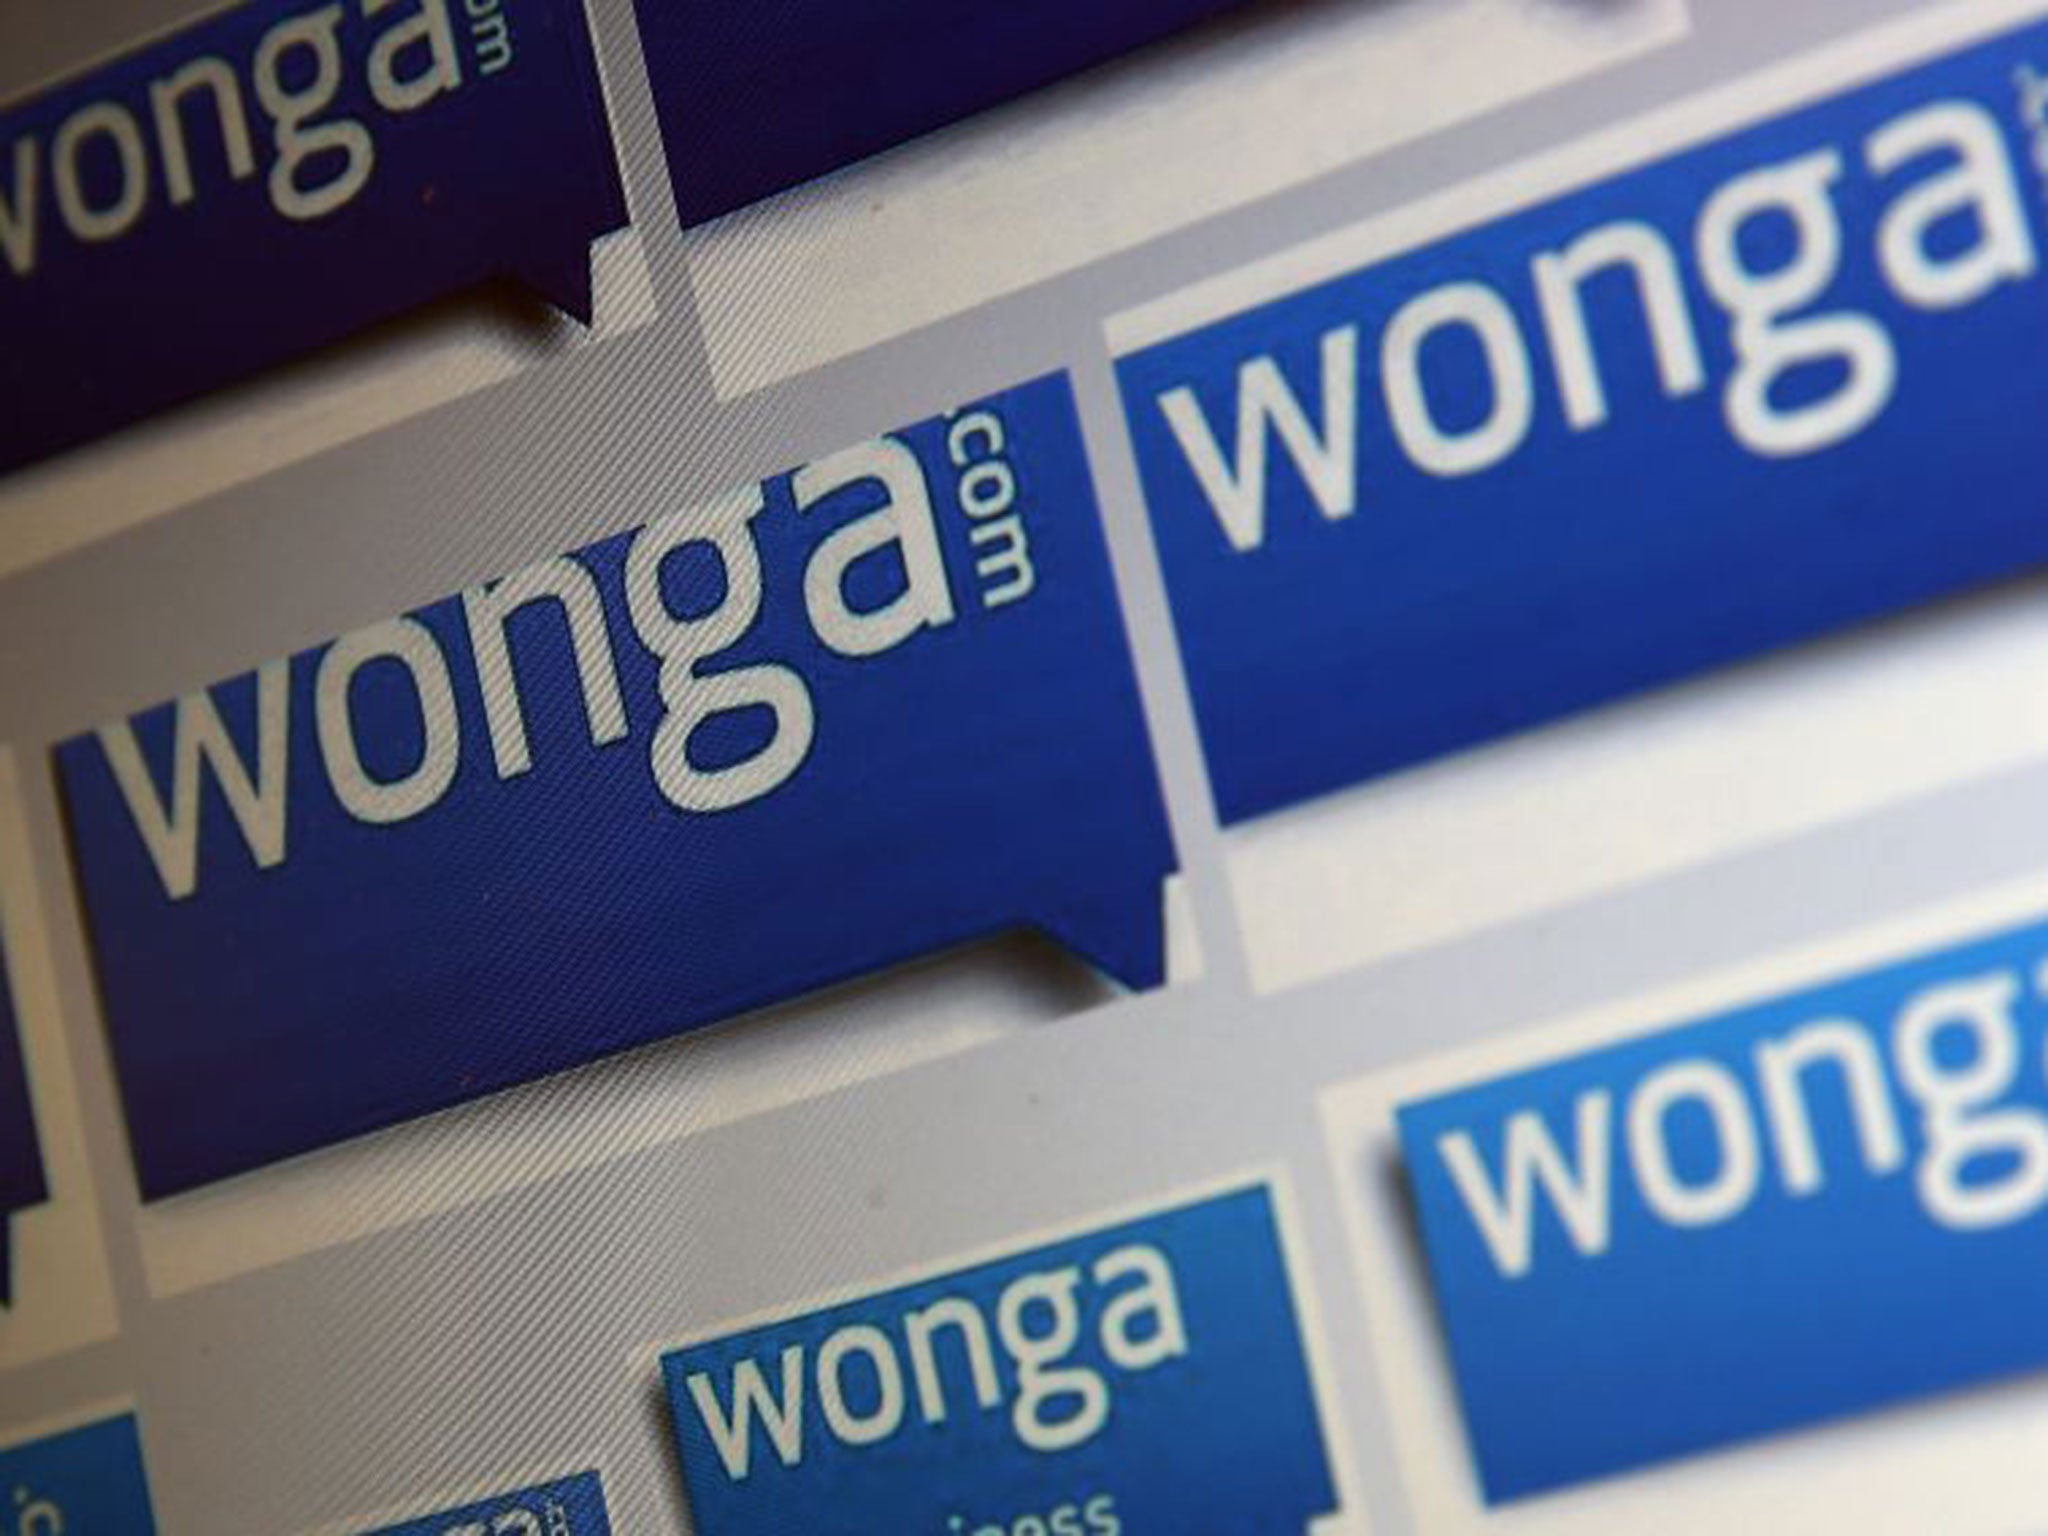 Wonga has agreed to change its lending practices